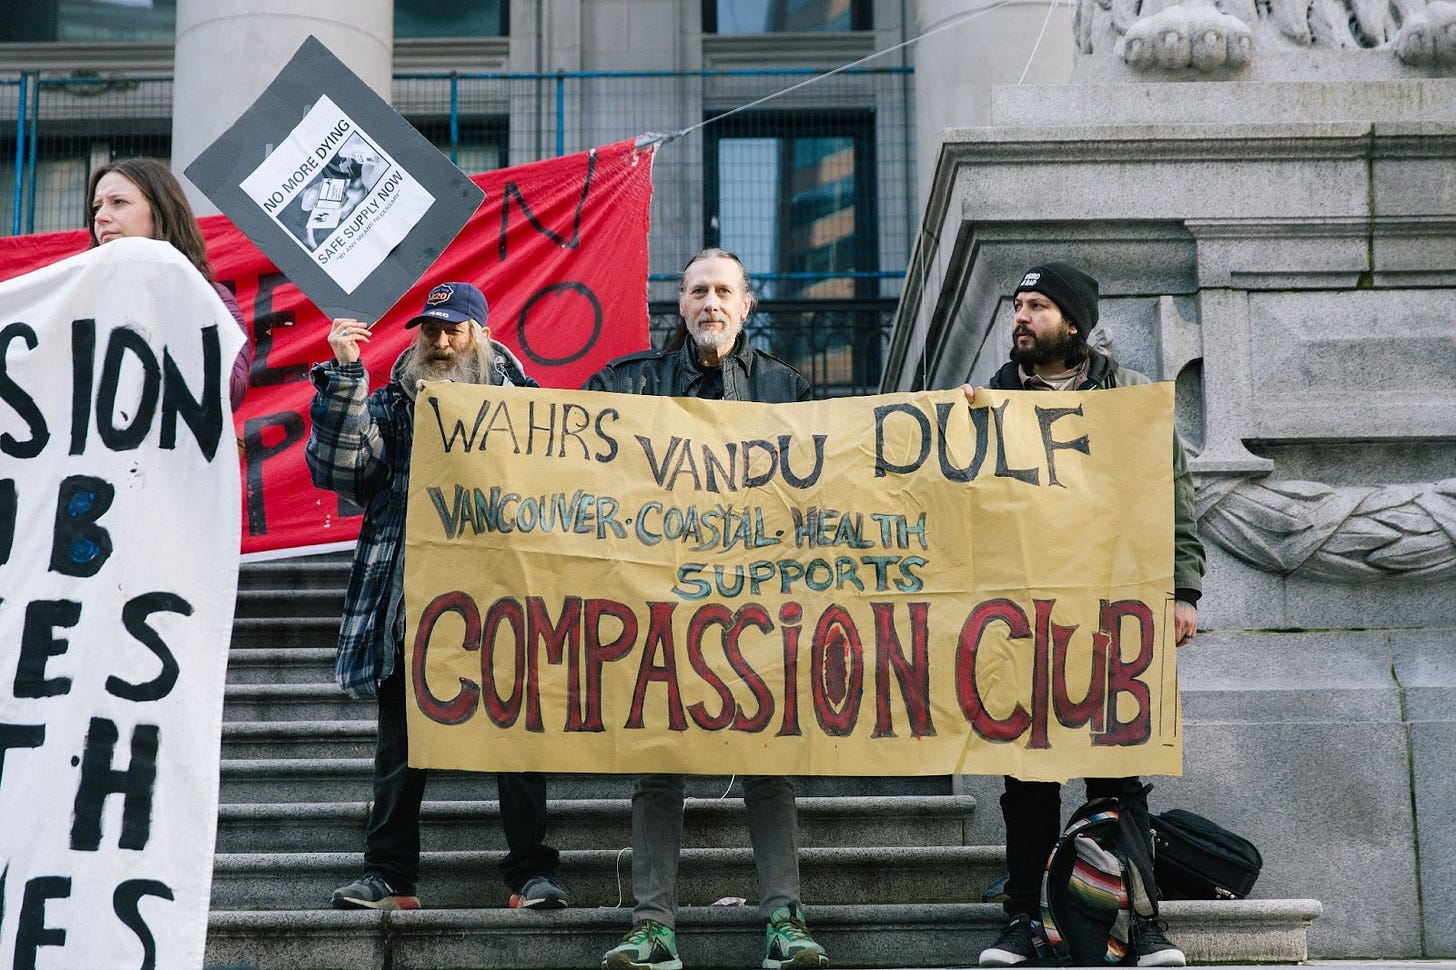 Three people on stairs at the Vancouver Art Gallery hold banners, one saying “WAHRS VANDU DULF Vancouver Coastal Health supports Compassion Club,” another saying “No more dying” and “safe supply now”